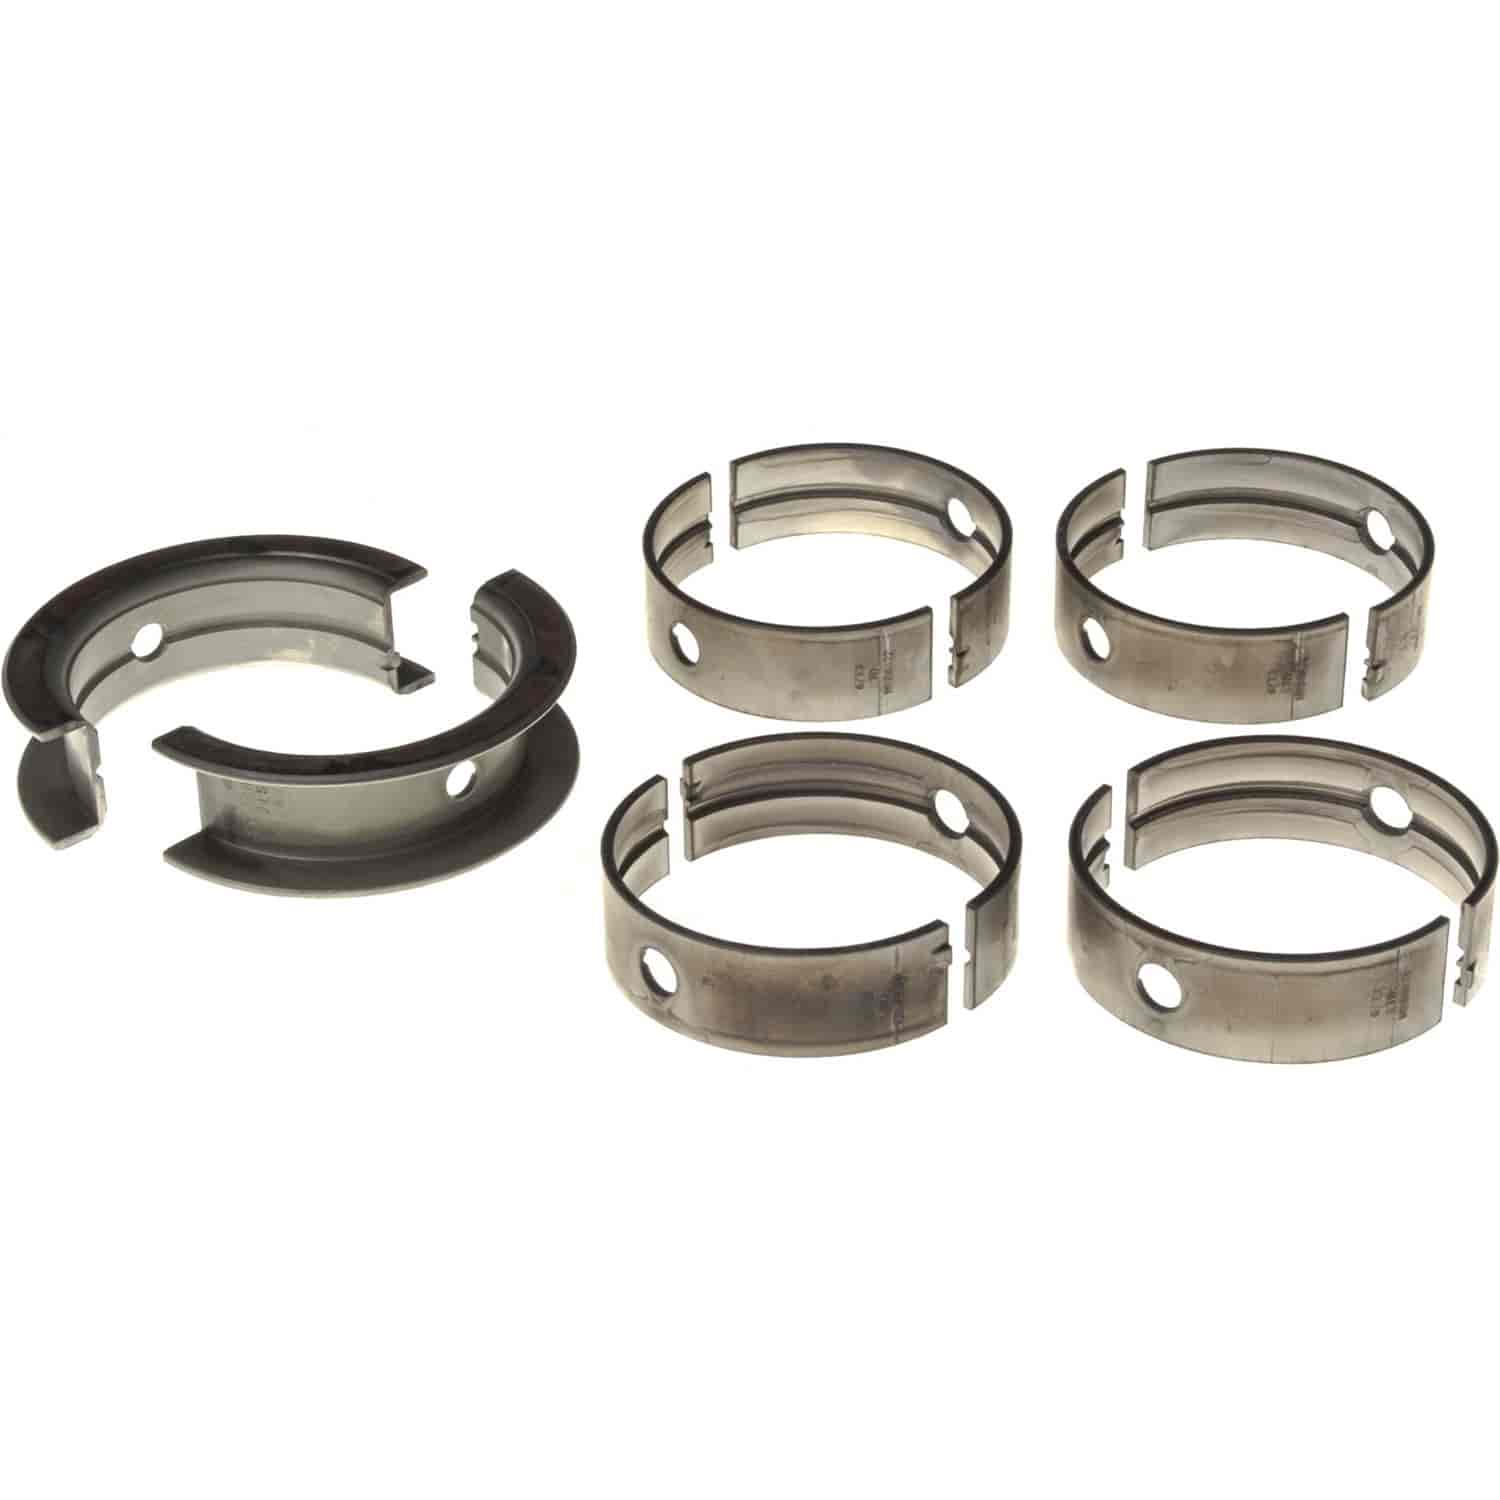 Main Bearing Set Ford 1964-1977 FE V8 352/360/390/410/427/428 (5.8/5.9/6.4/6.7/7.0L) with -.060" Undersize